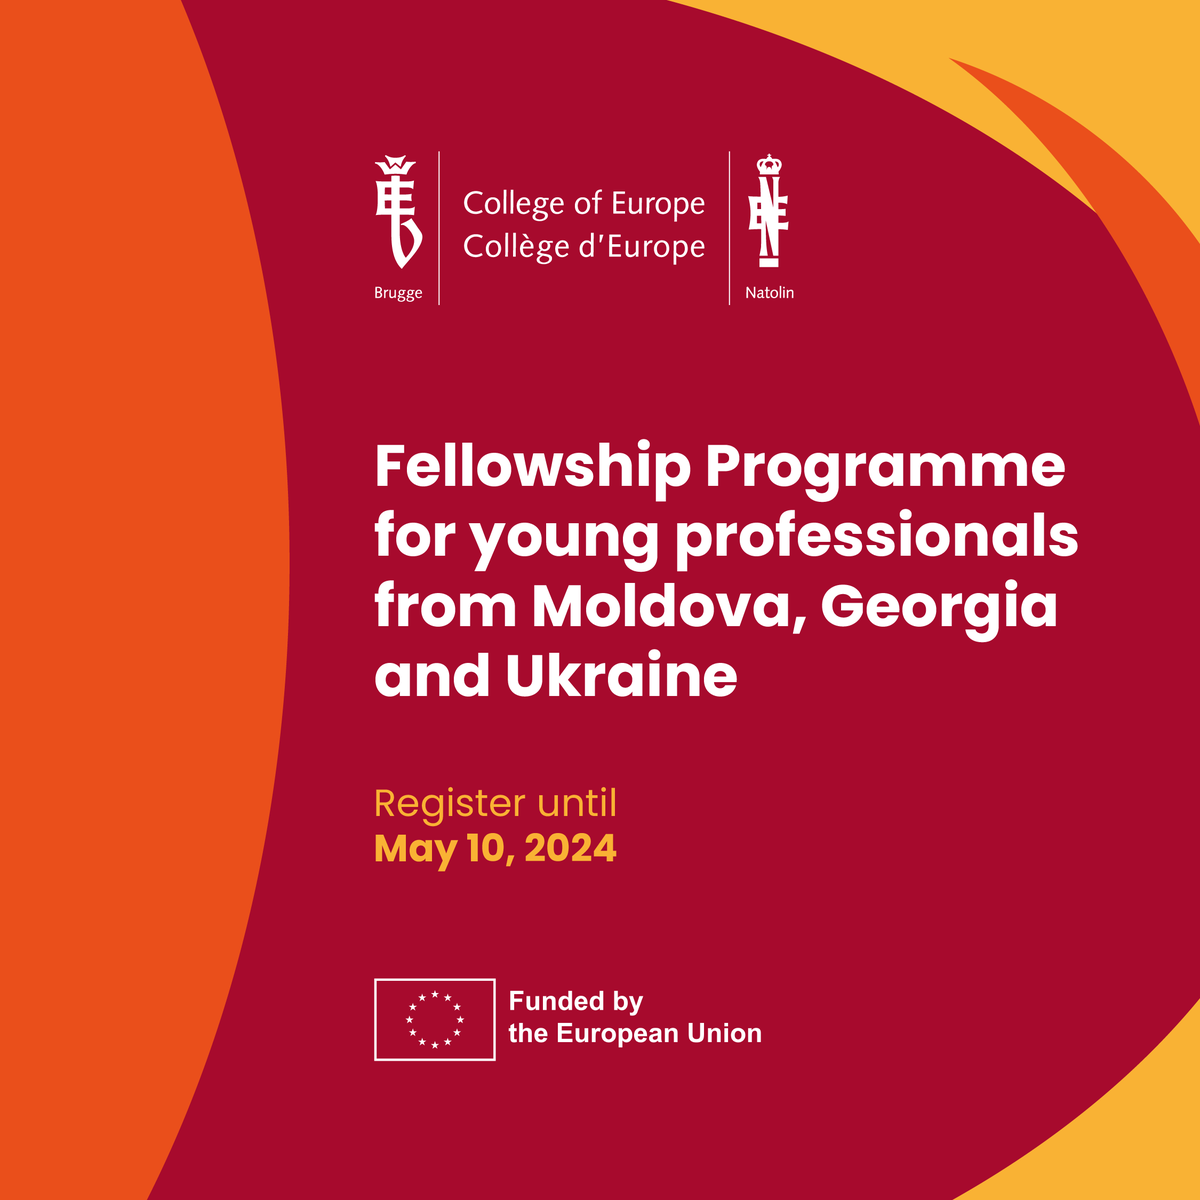 🌟College of Europe in Natolin announces a fellowship programme for young professionals from Ukraine, Moldova, and Georgia. The scholarships are covered by the EU. 🇪🇺 Apply until May 10, 2024. Learn more here 👉coleurope.eu/natolin/execut… #EuropeanYearOfSkills